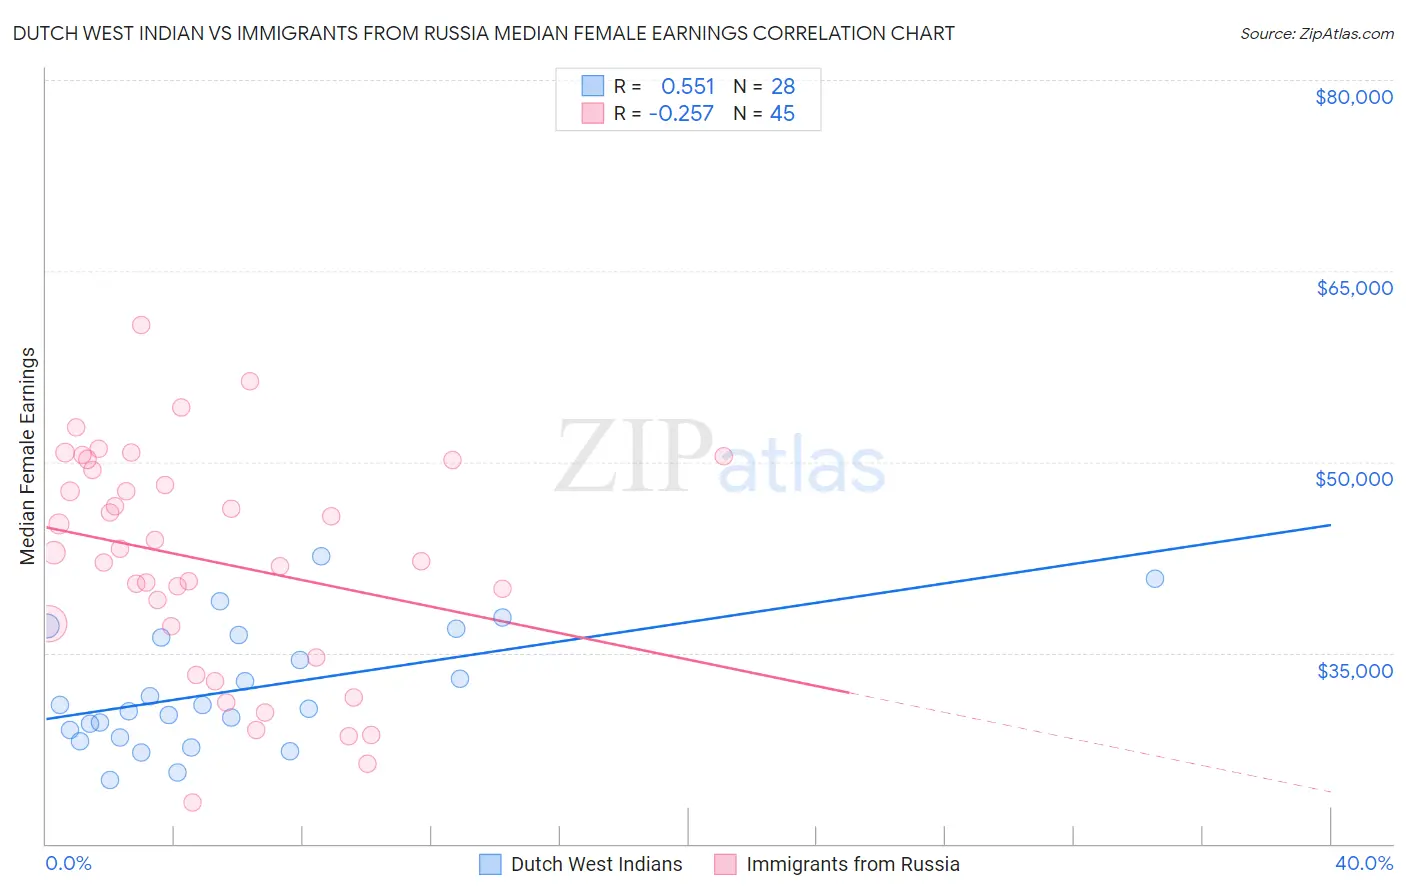 Dutch West Indian vs Immigrants from Russia Median Female Earnings